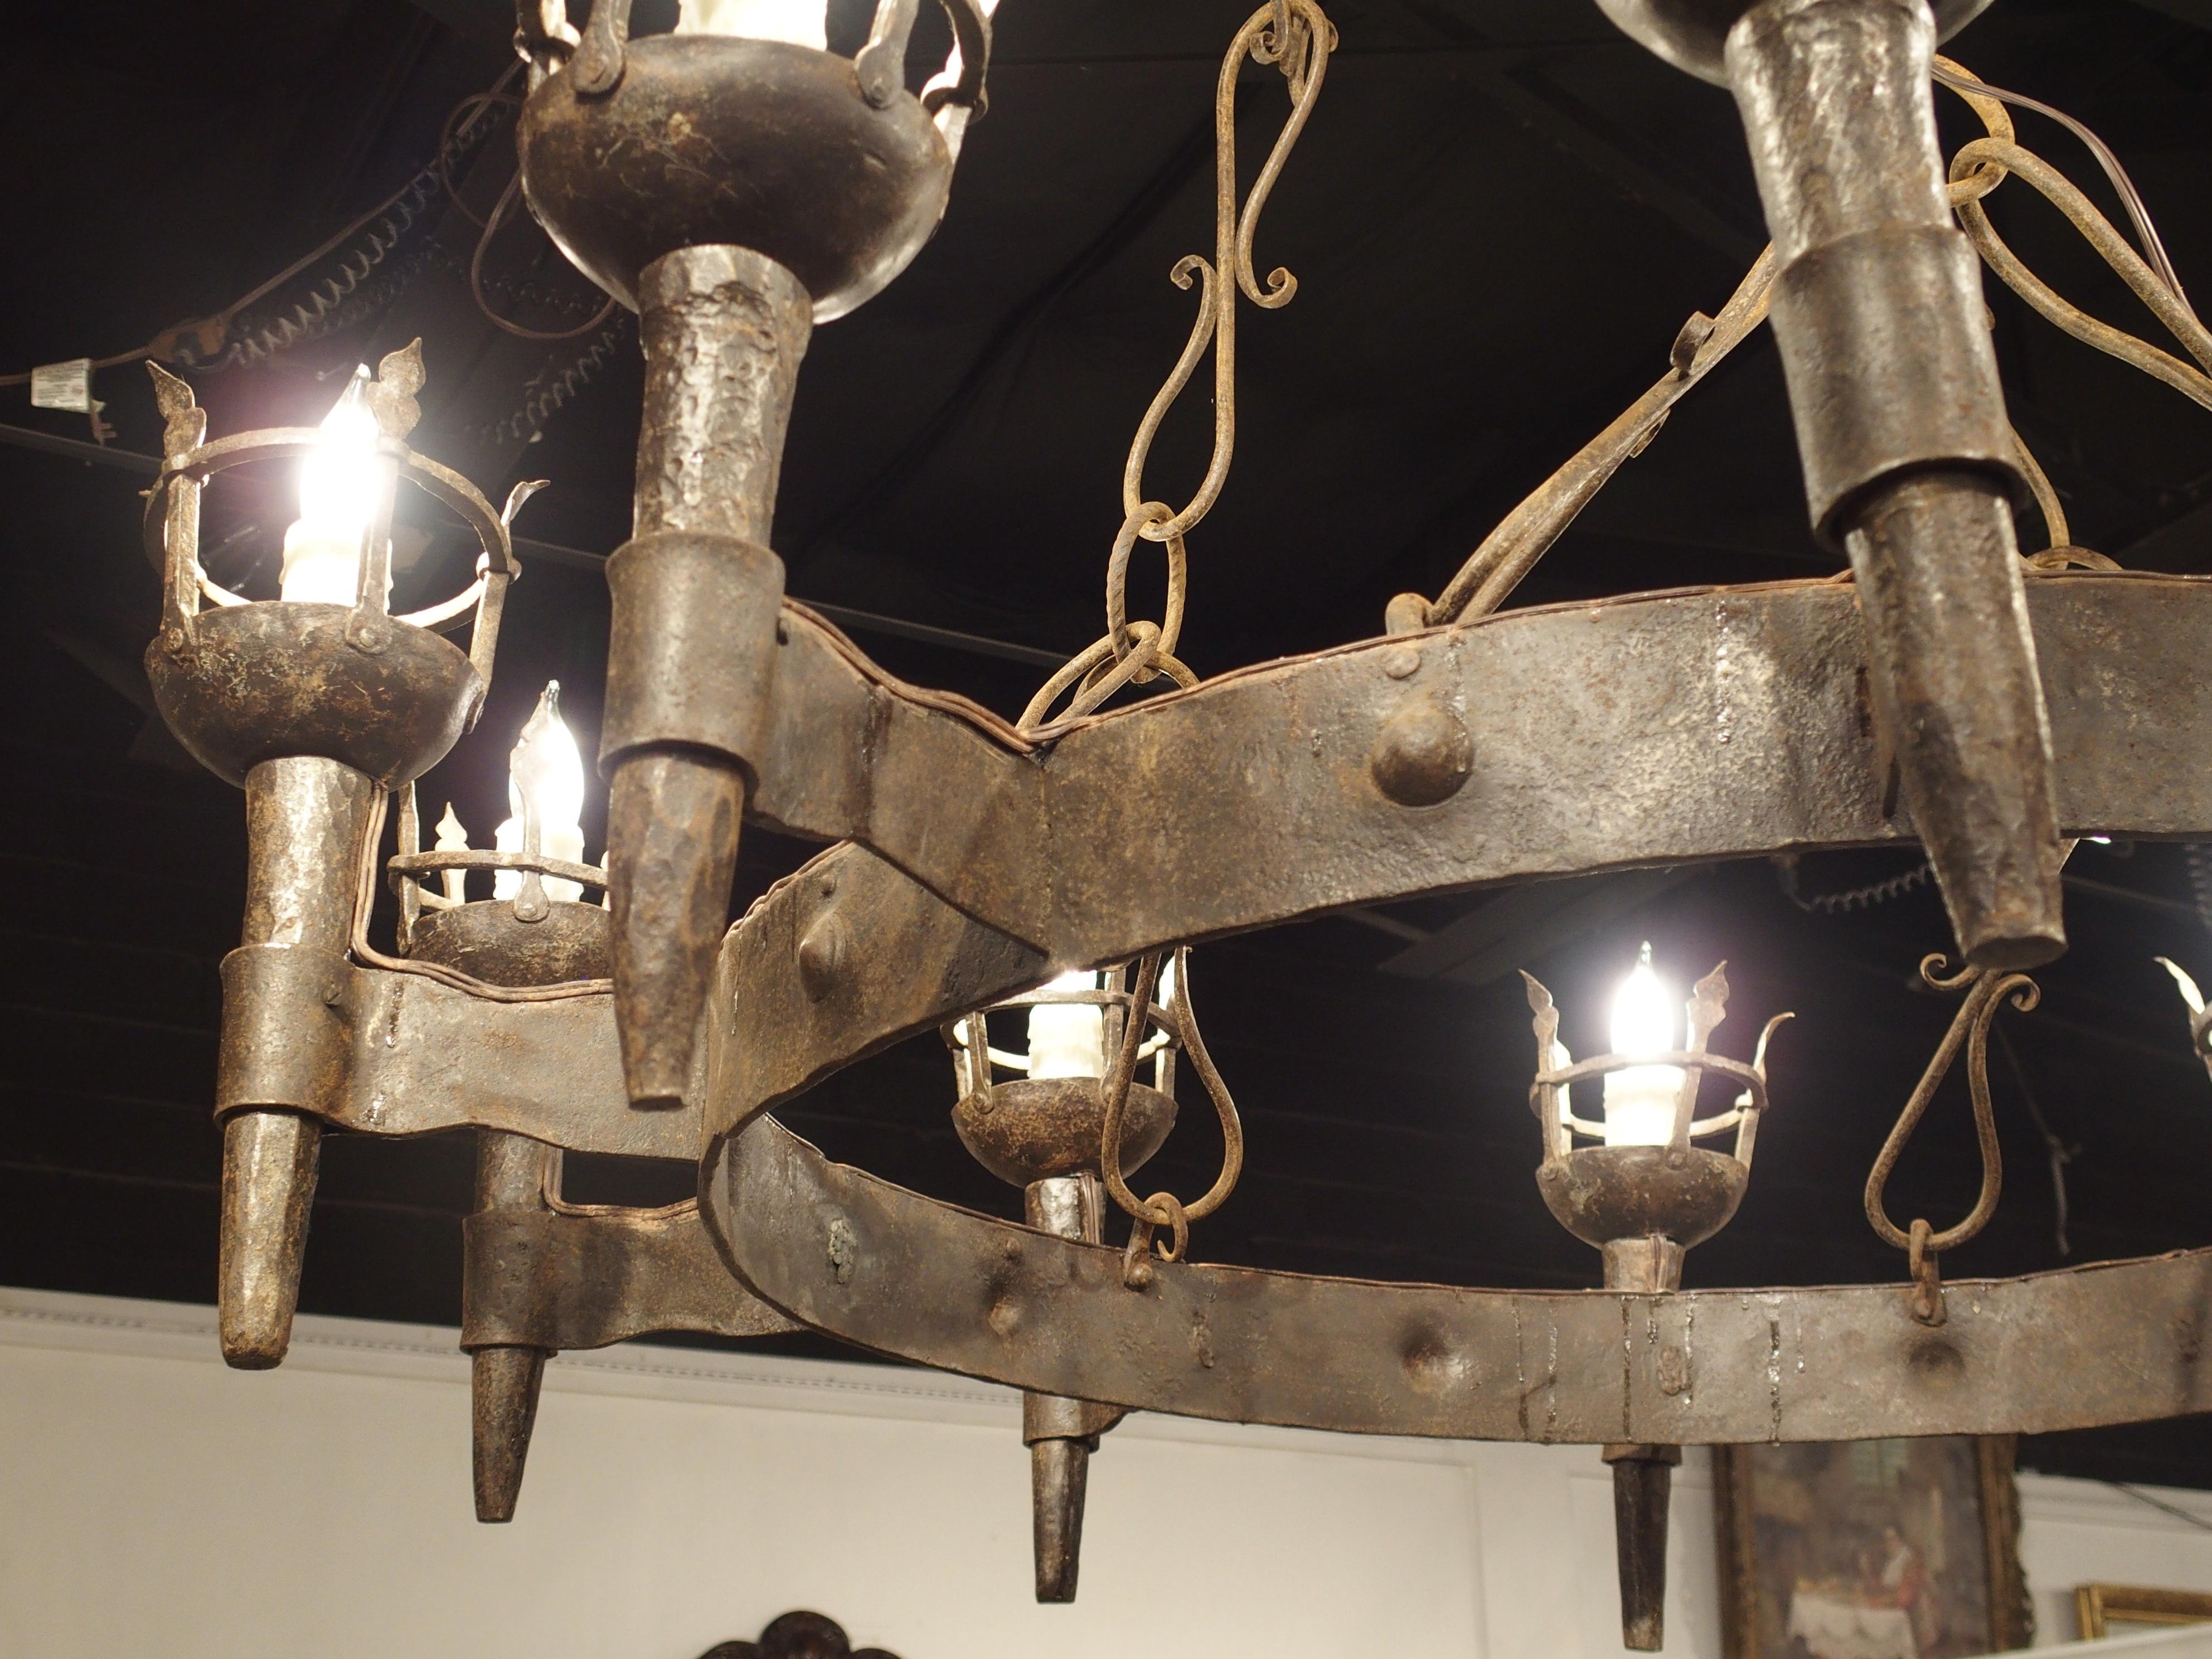 Hammered Large Antique Wrought Iron 10-Light Torch Chandelier from France, Late 1800s